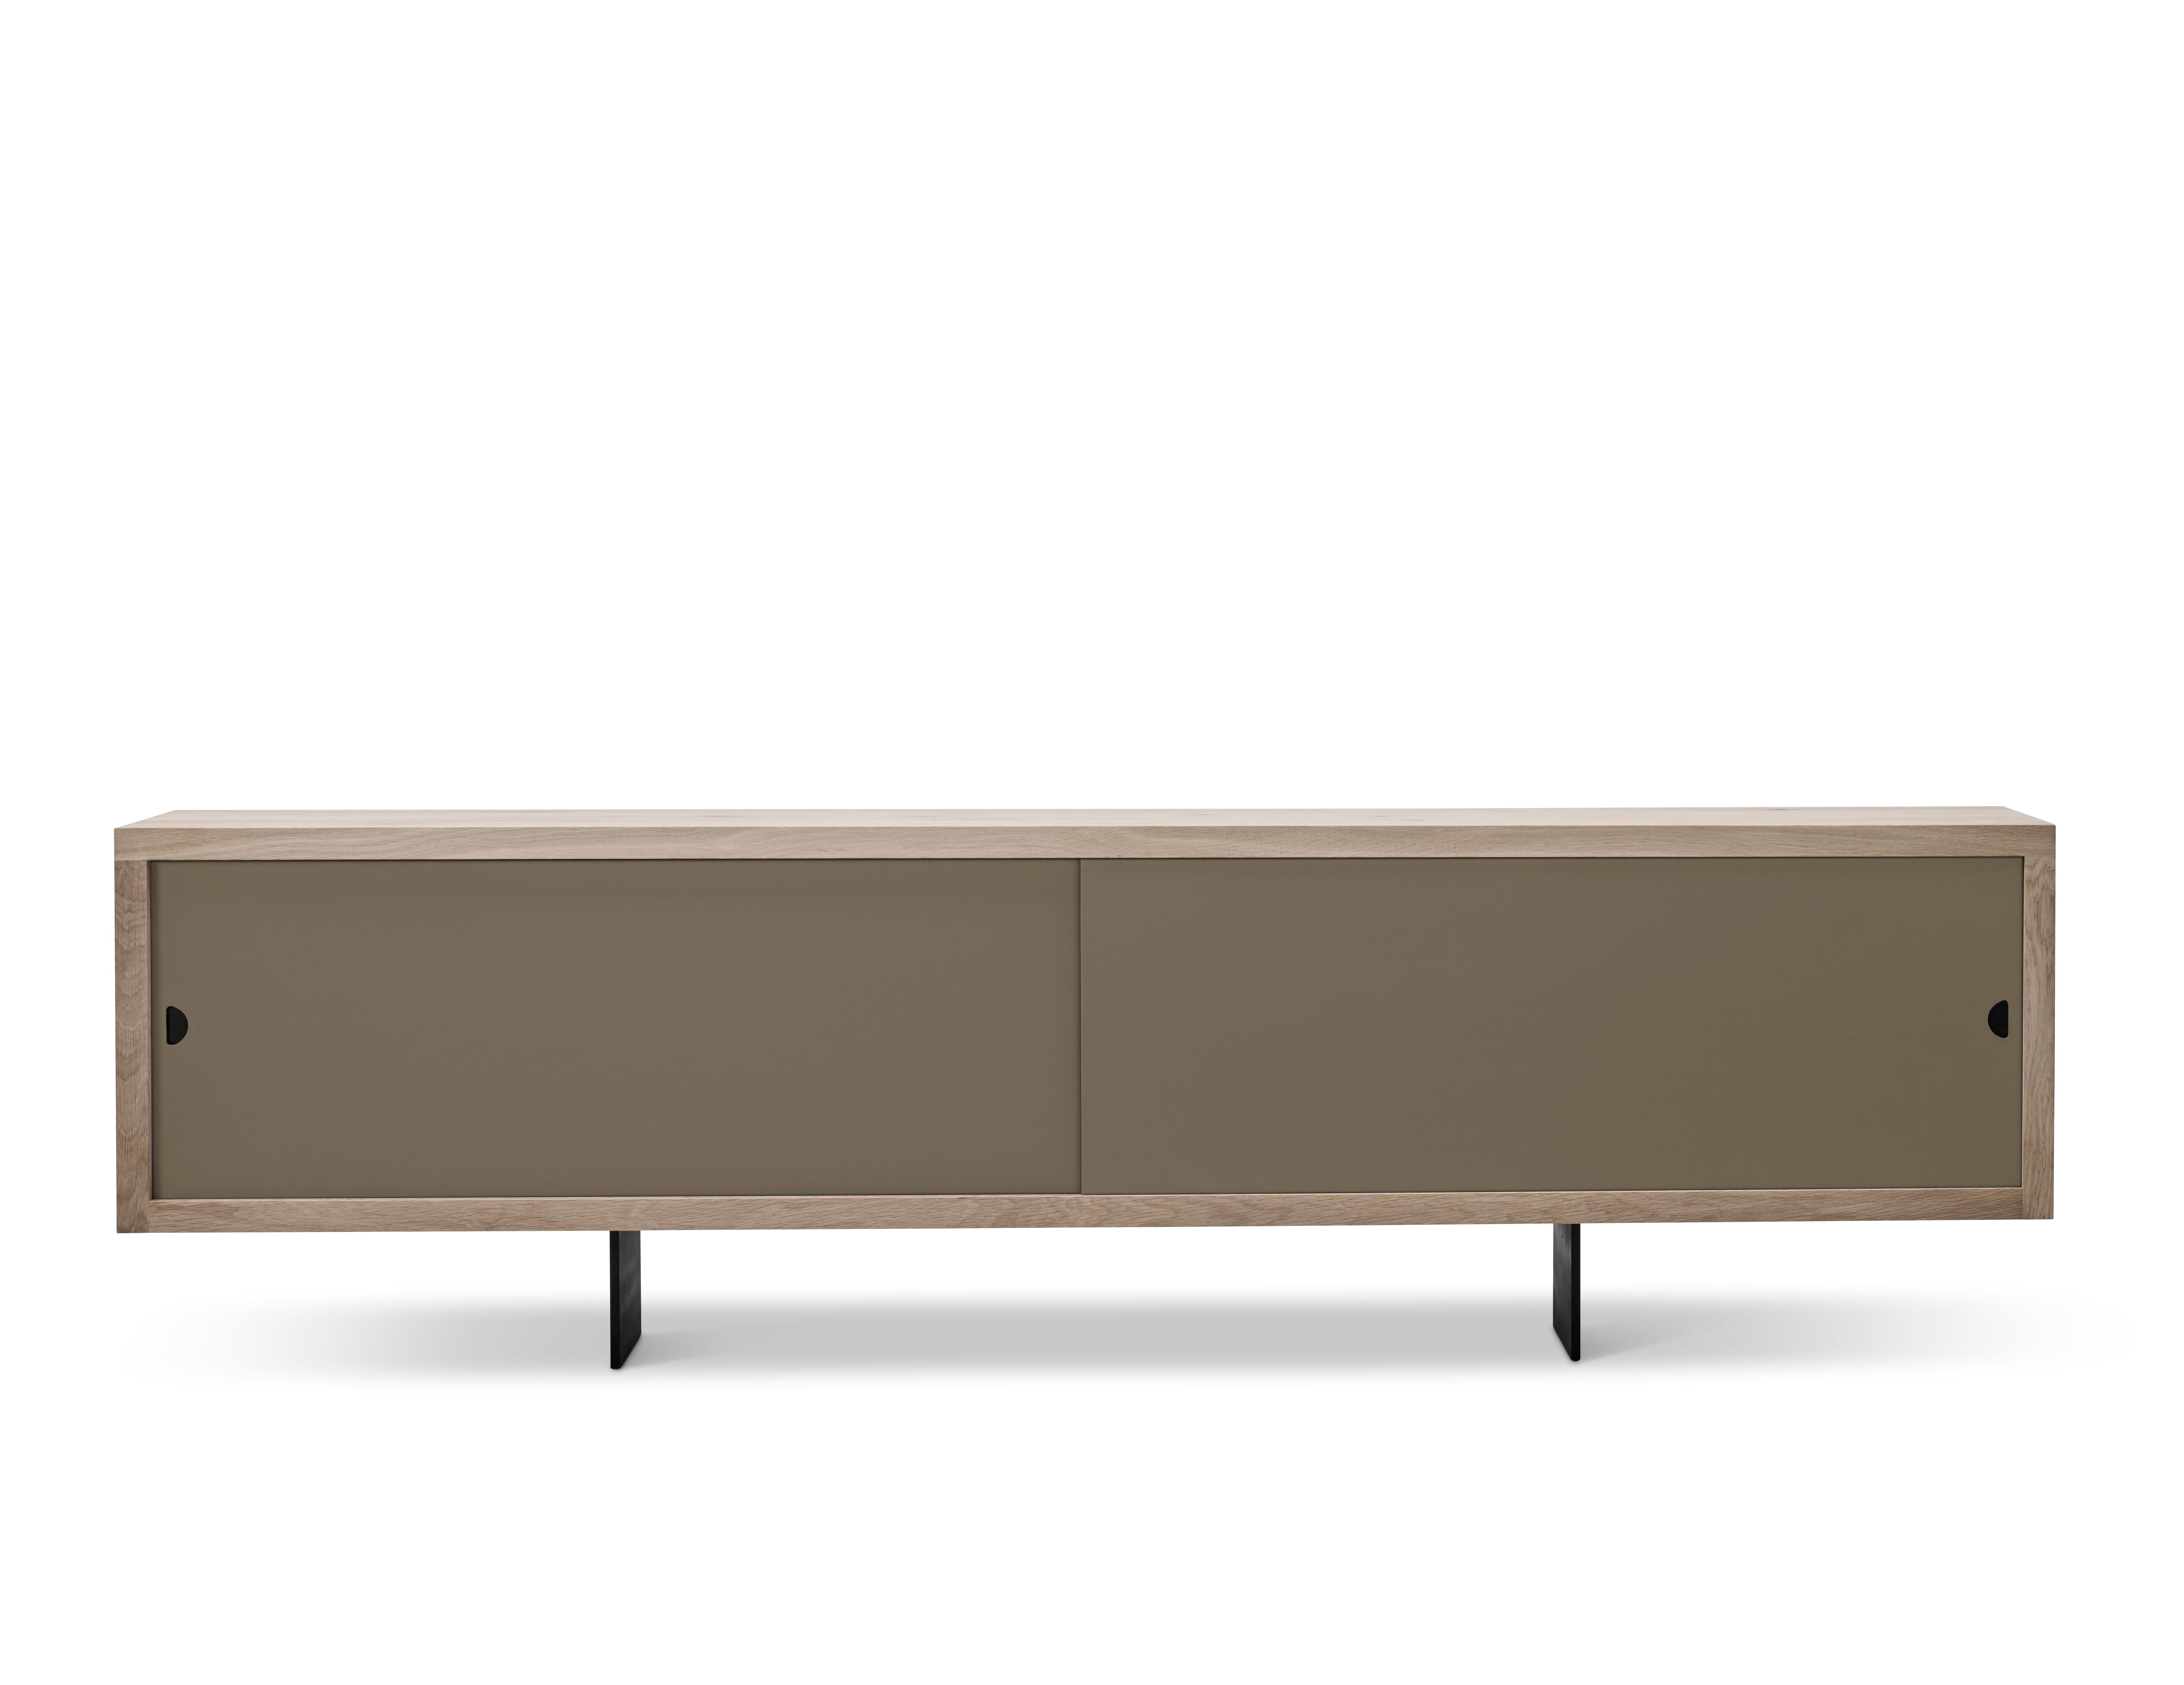 GRAND Sideboard by Jacob Plejdrup for DK3, 2016

Sideboard with sliding doors, available in castoro, beige, black or white.
Model in the picture: Castoro
Dimensions: H 68 x 50 x 240

---
dk3 is known for the large plank tables, so it was